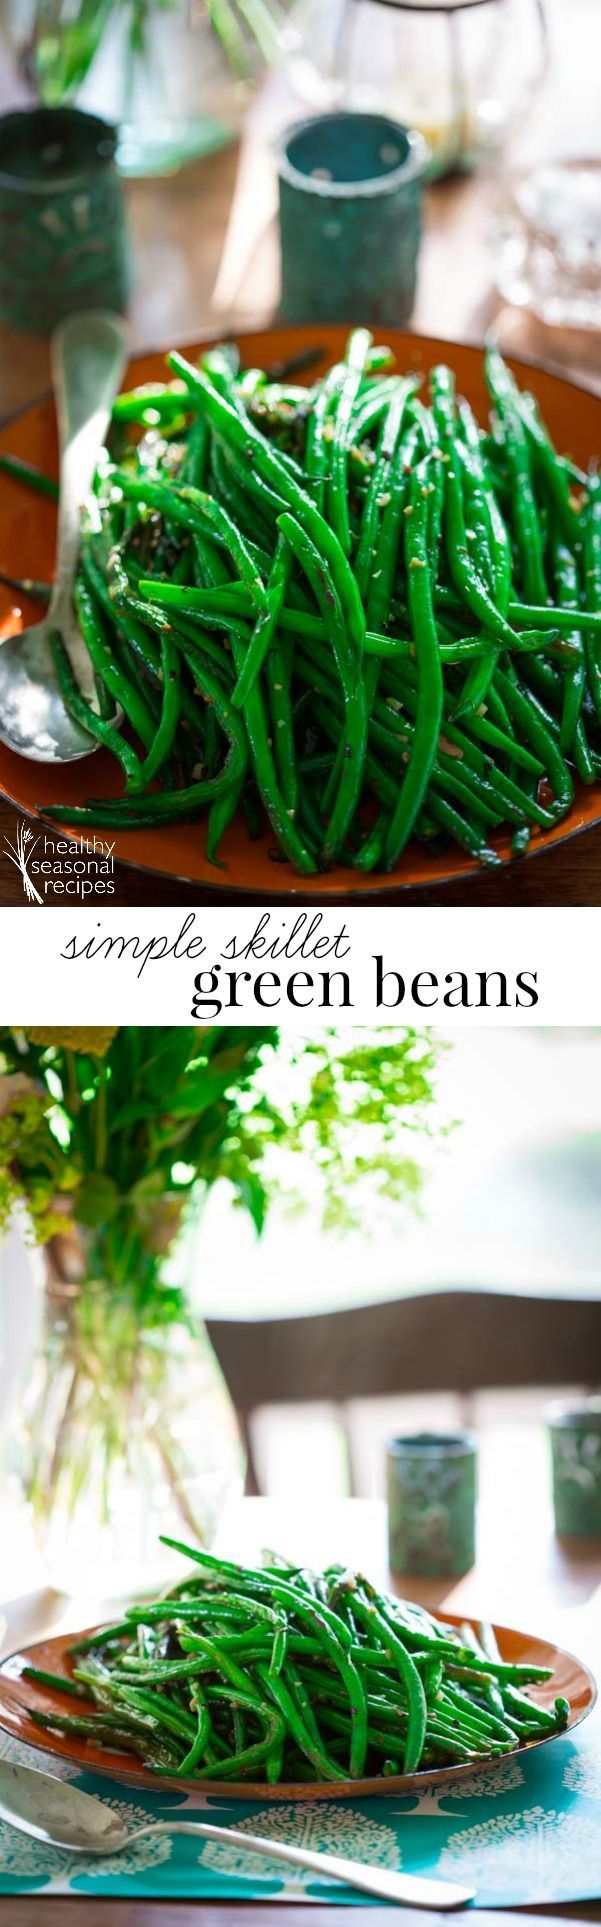 These simple skillet green beans are a perfect healthy side dish for lazy days of summer. Simple one-pot green bean recipe with